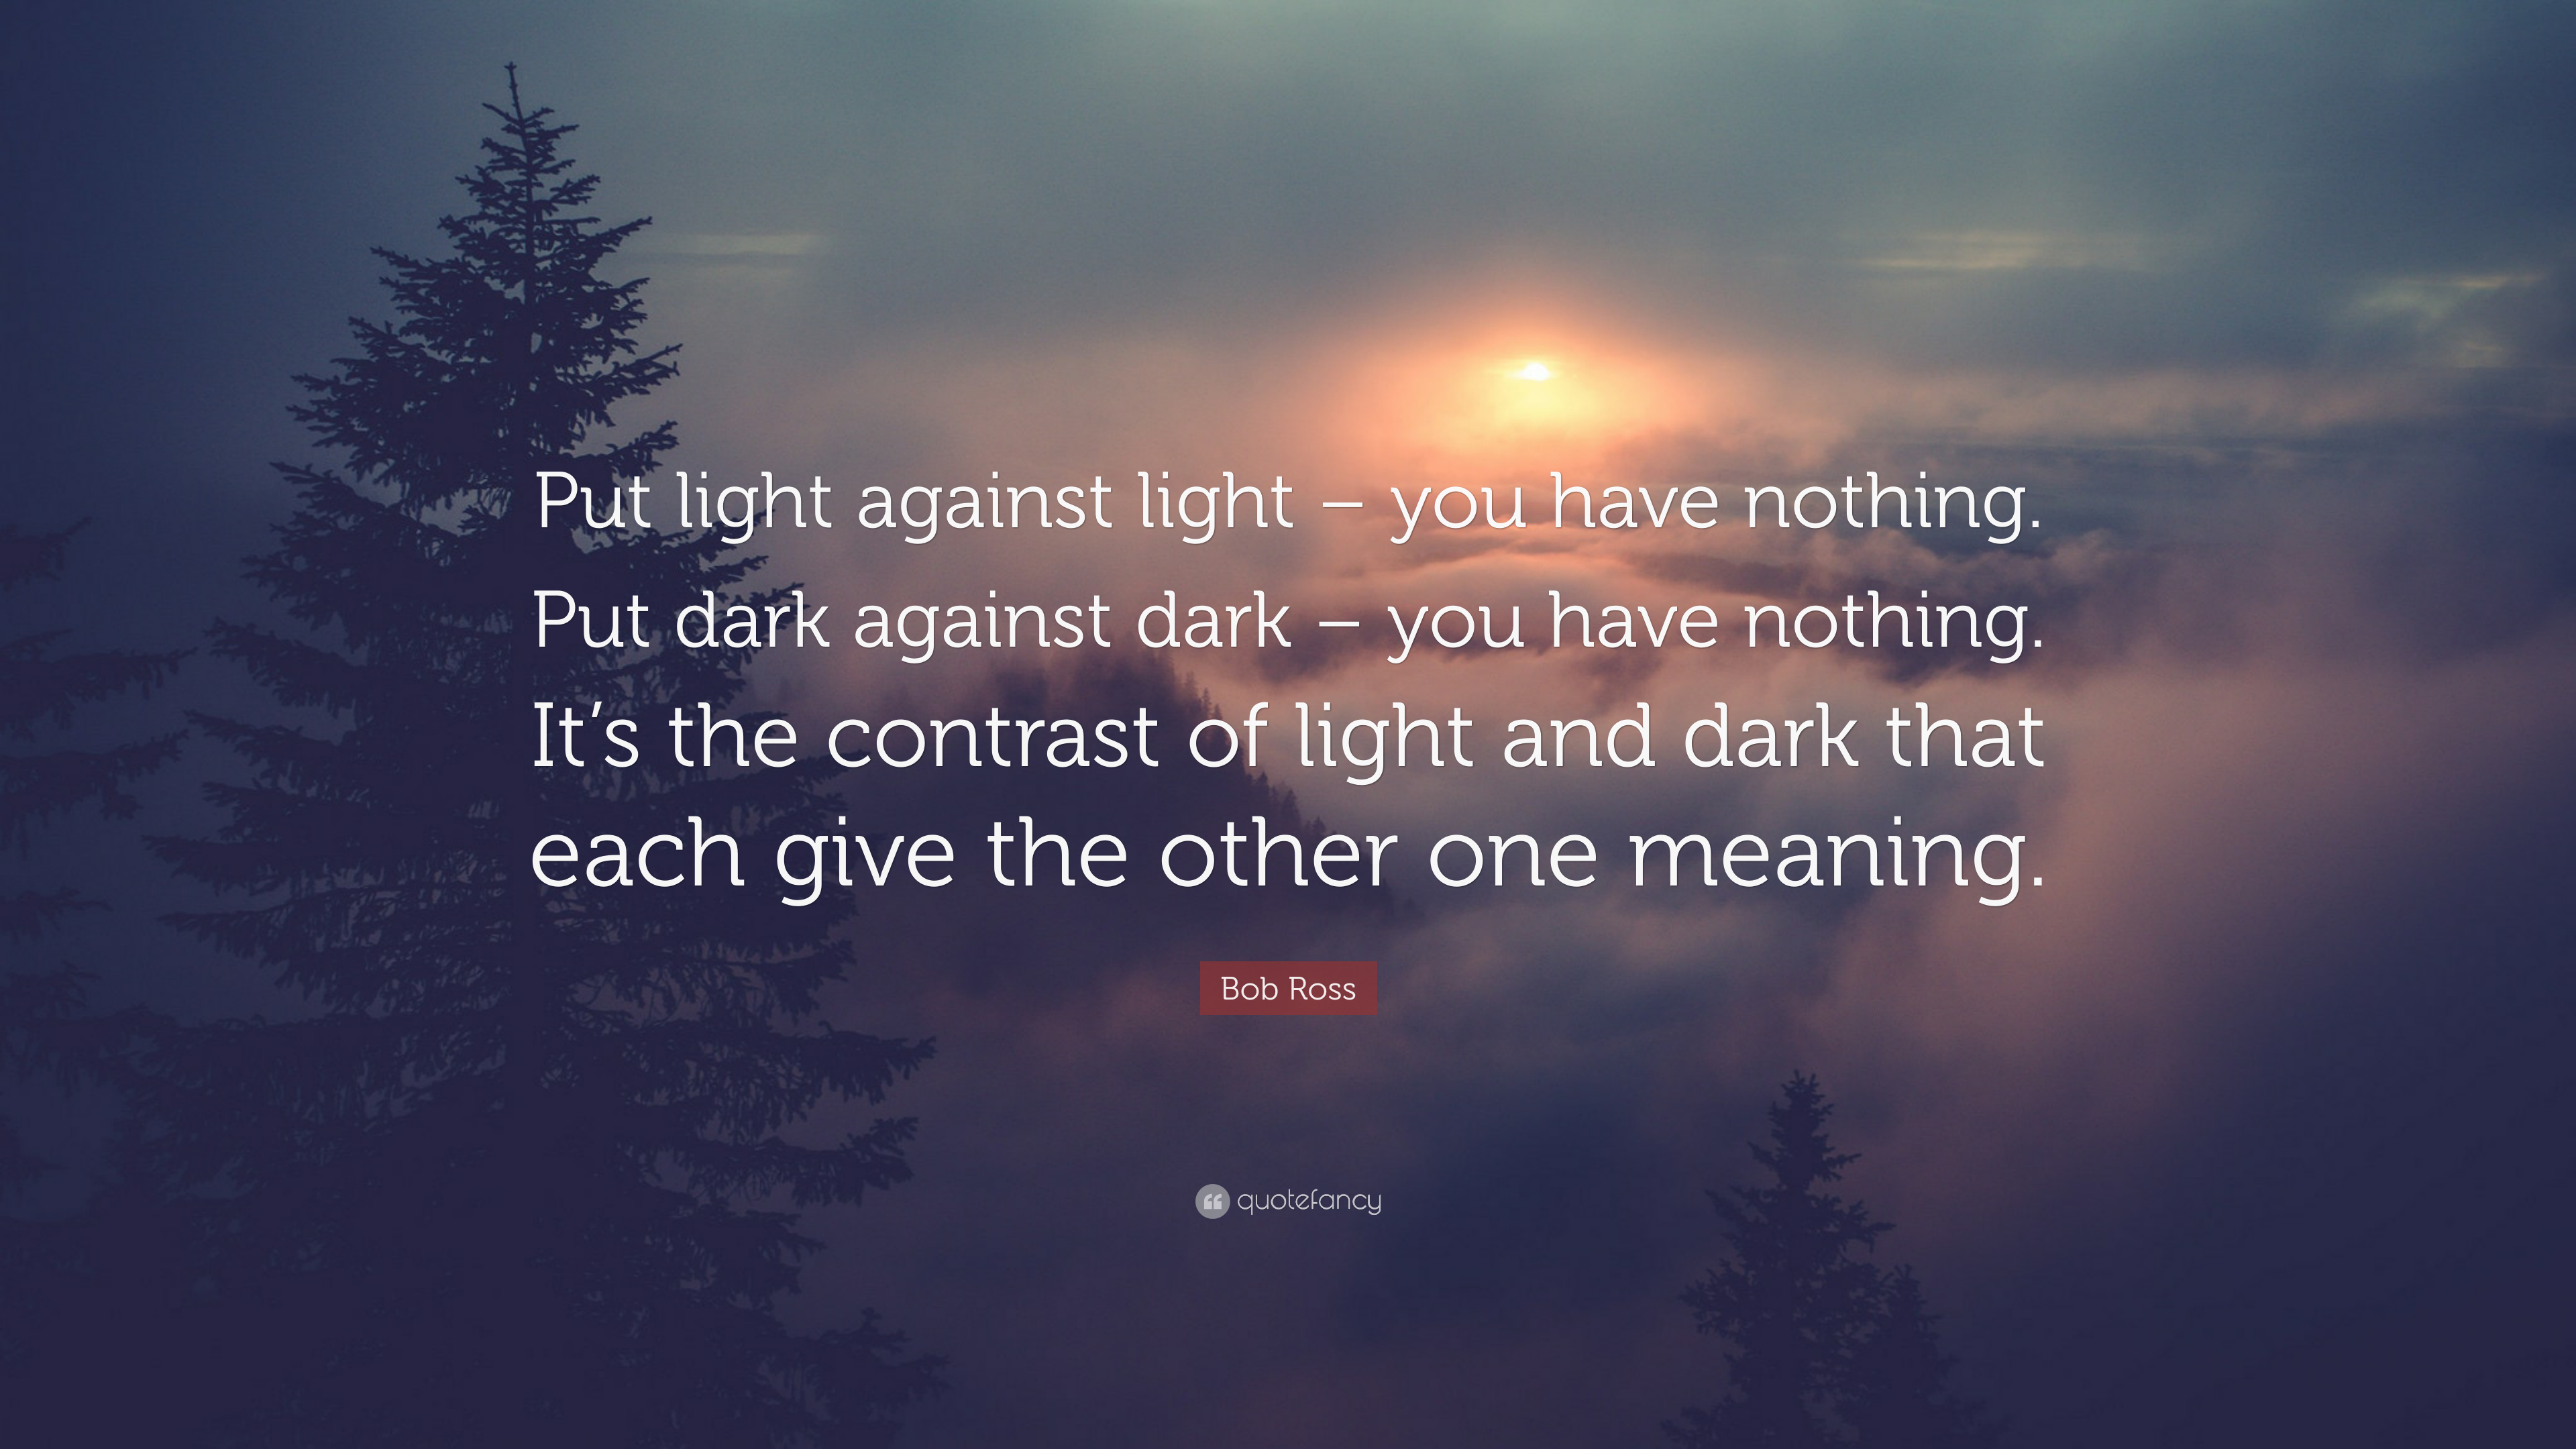 Put light against light – you have nothing. Put dark against dark – you have nothing. It’s the contrast of light and dark that each give the other one meaning